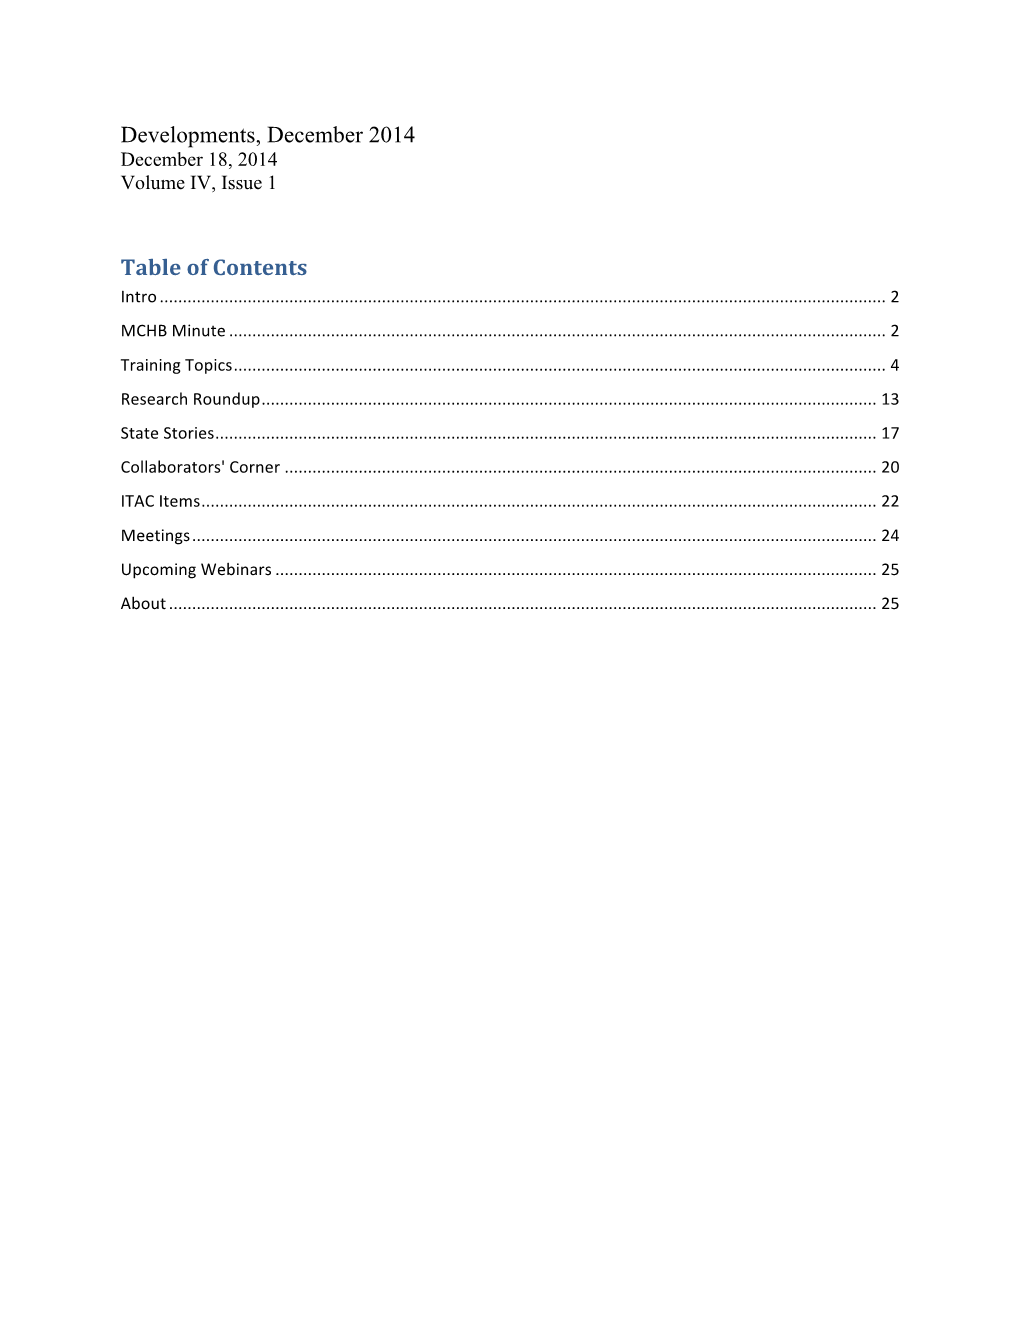 Developments, December 2014 Table of Contents